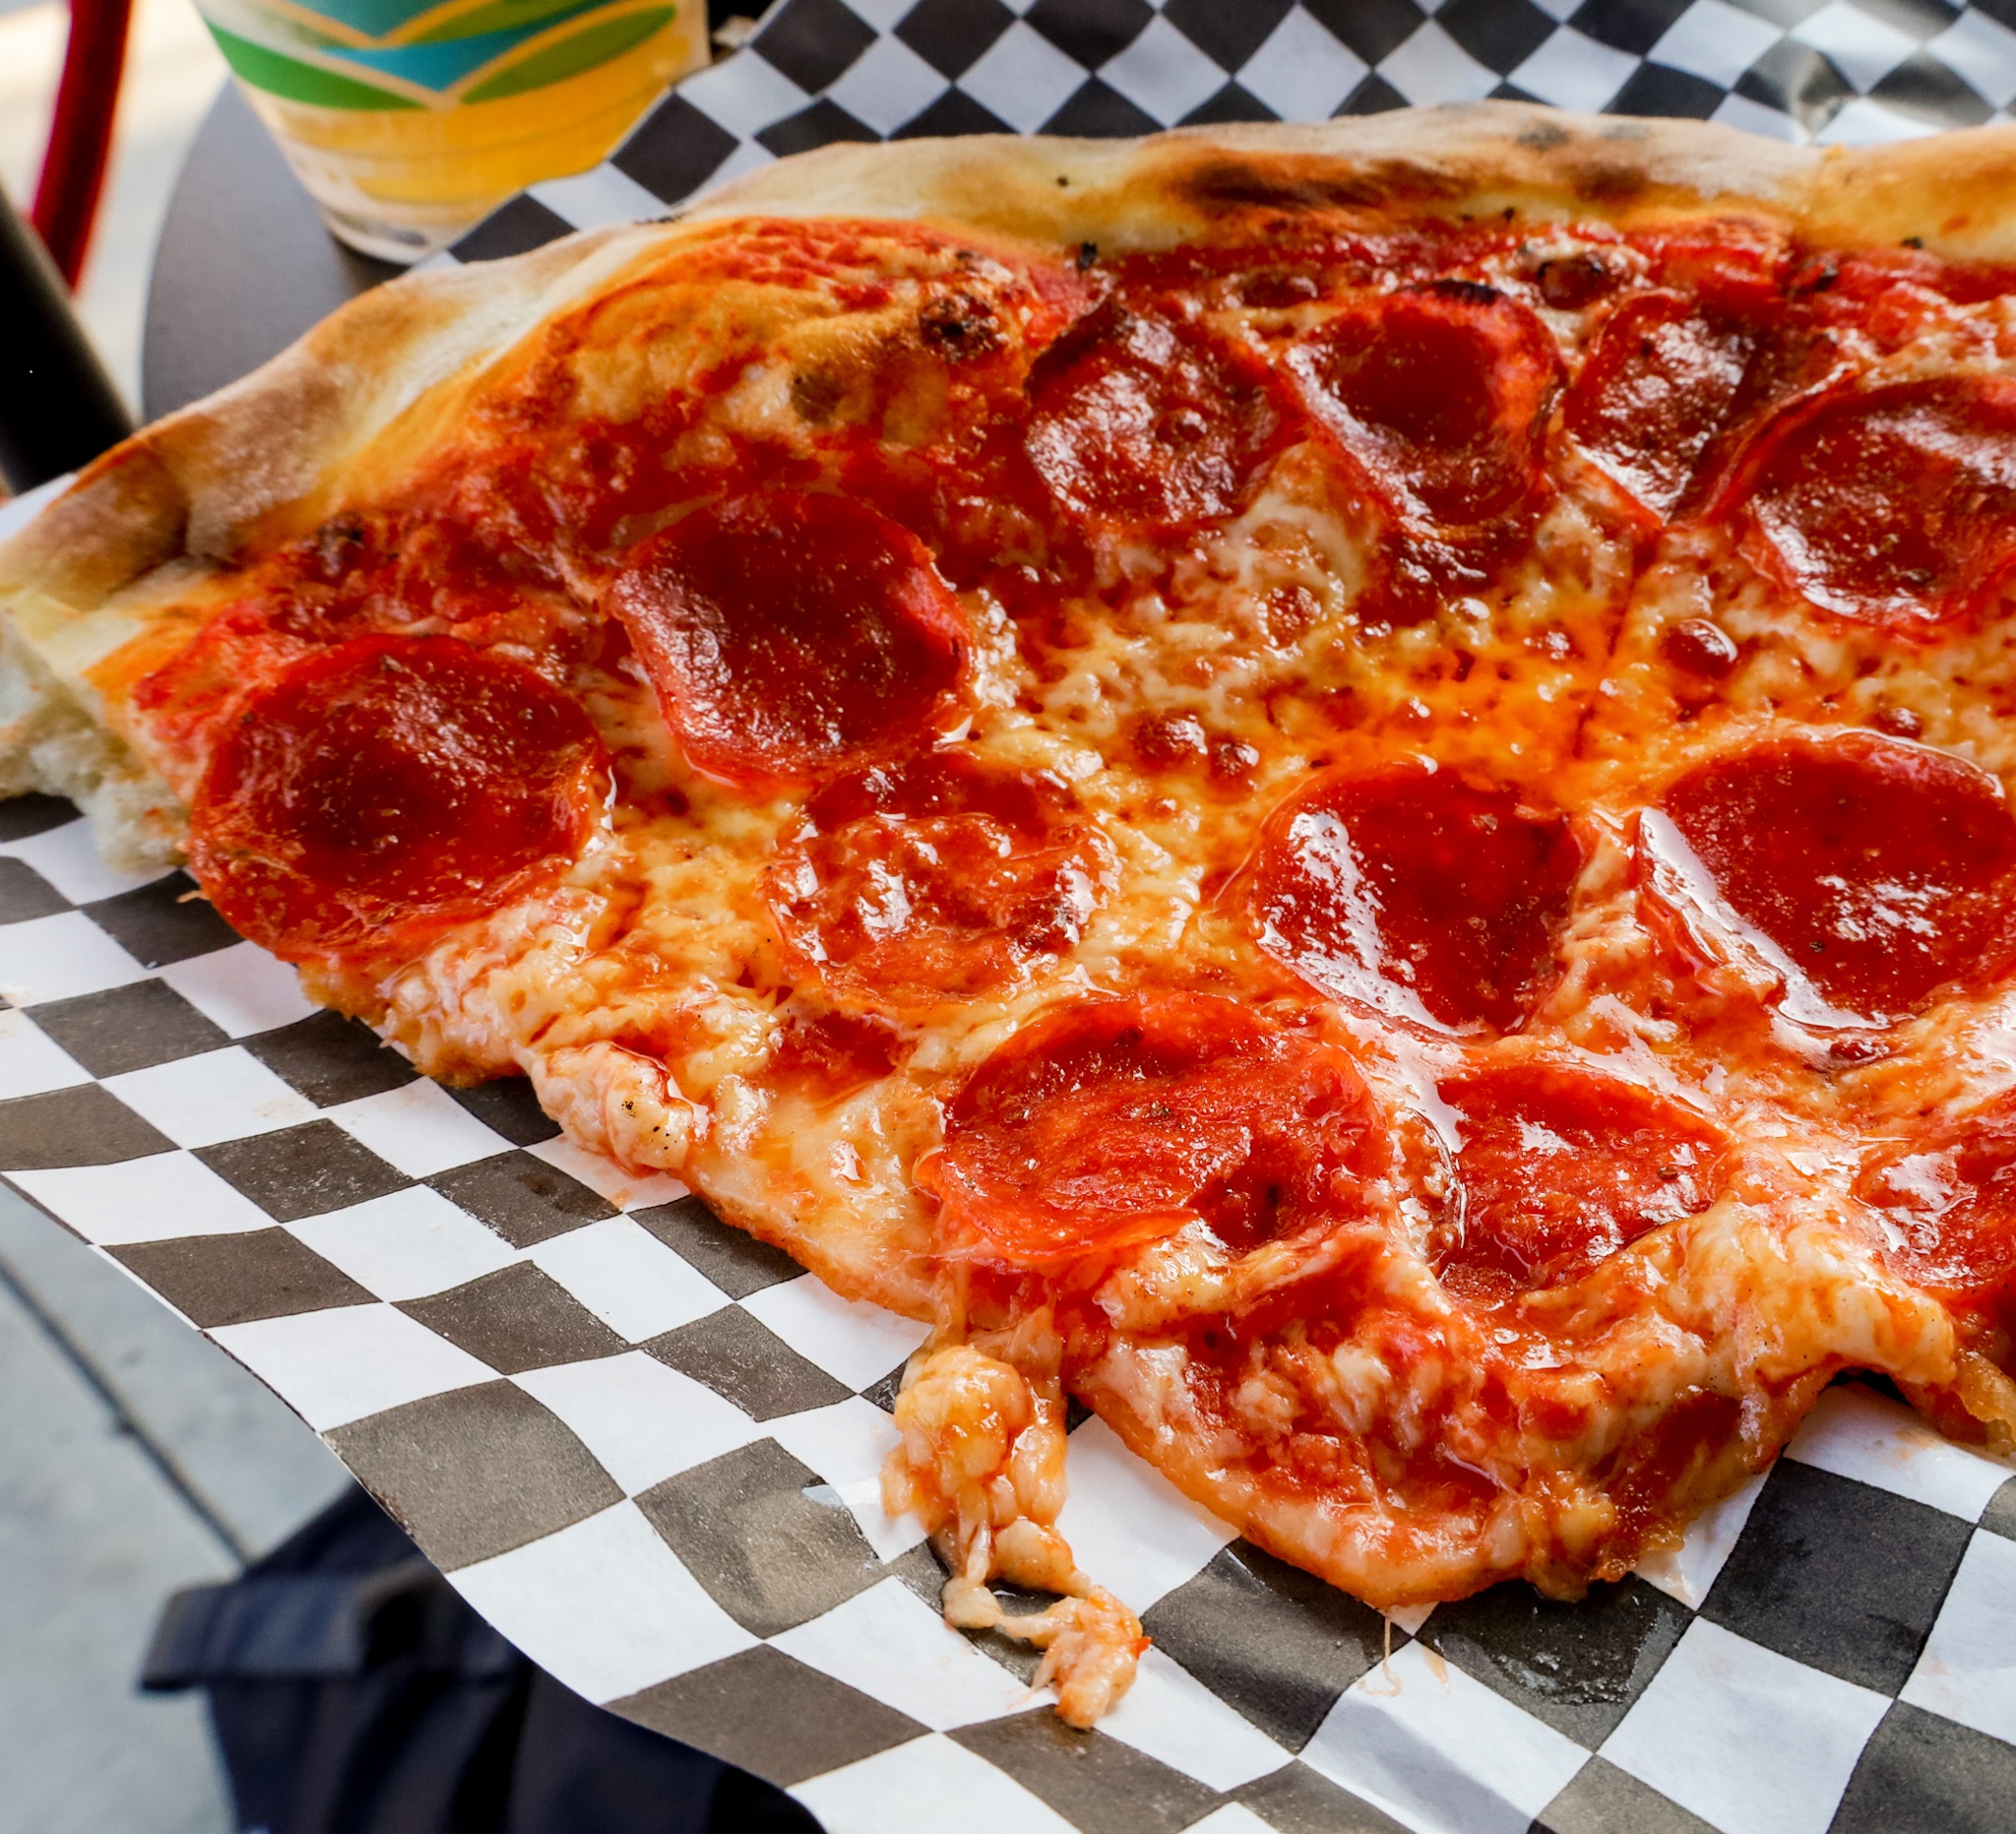 A Love Letter To the Pizza of Long Beach